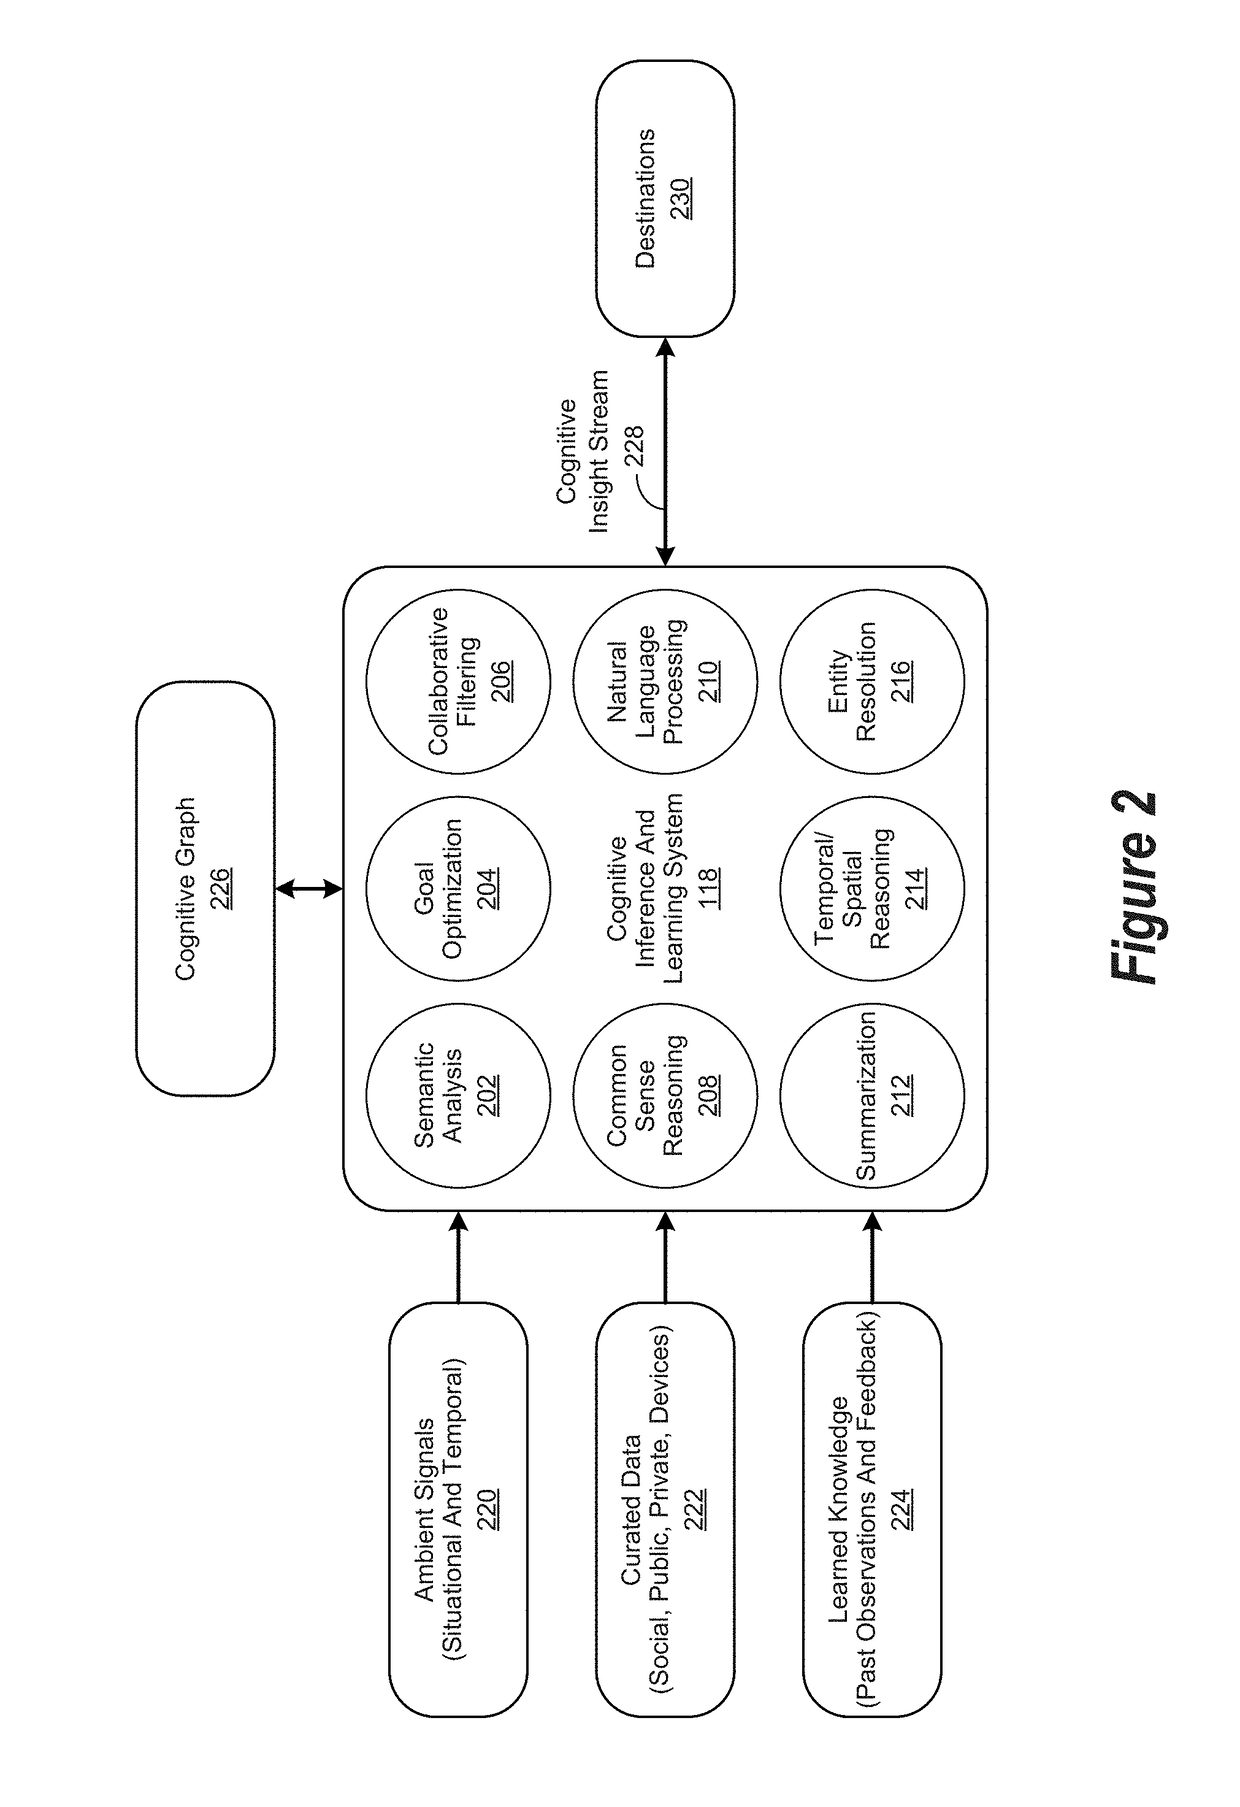 Method for Monitoring Interactions to Perform a Cognitive Learning Operation